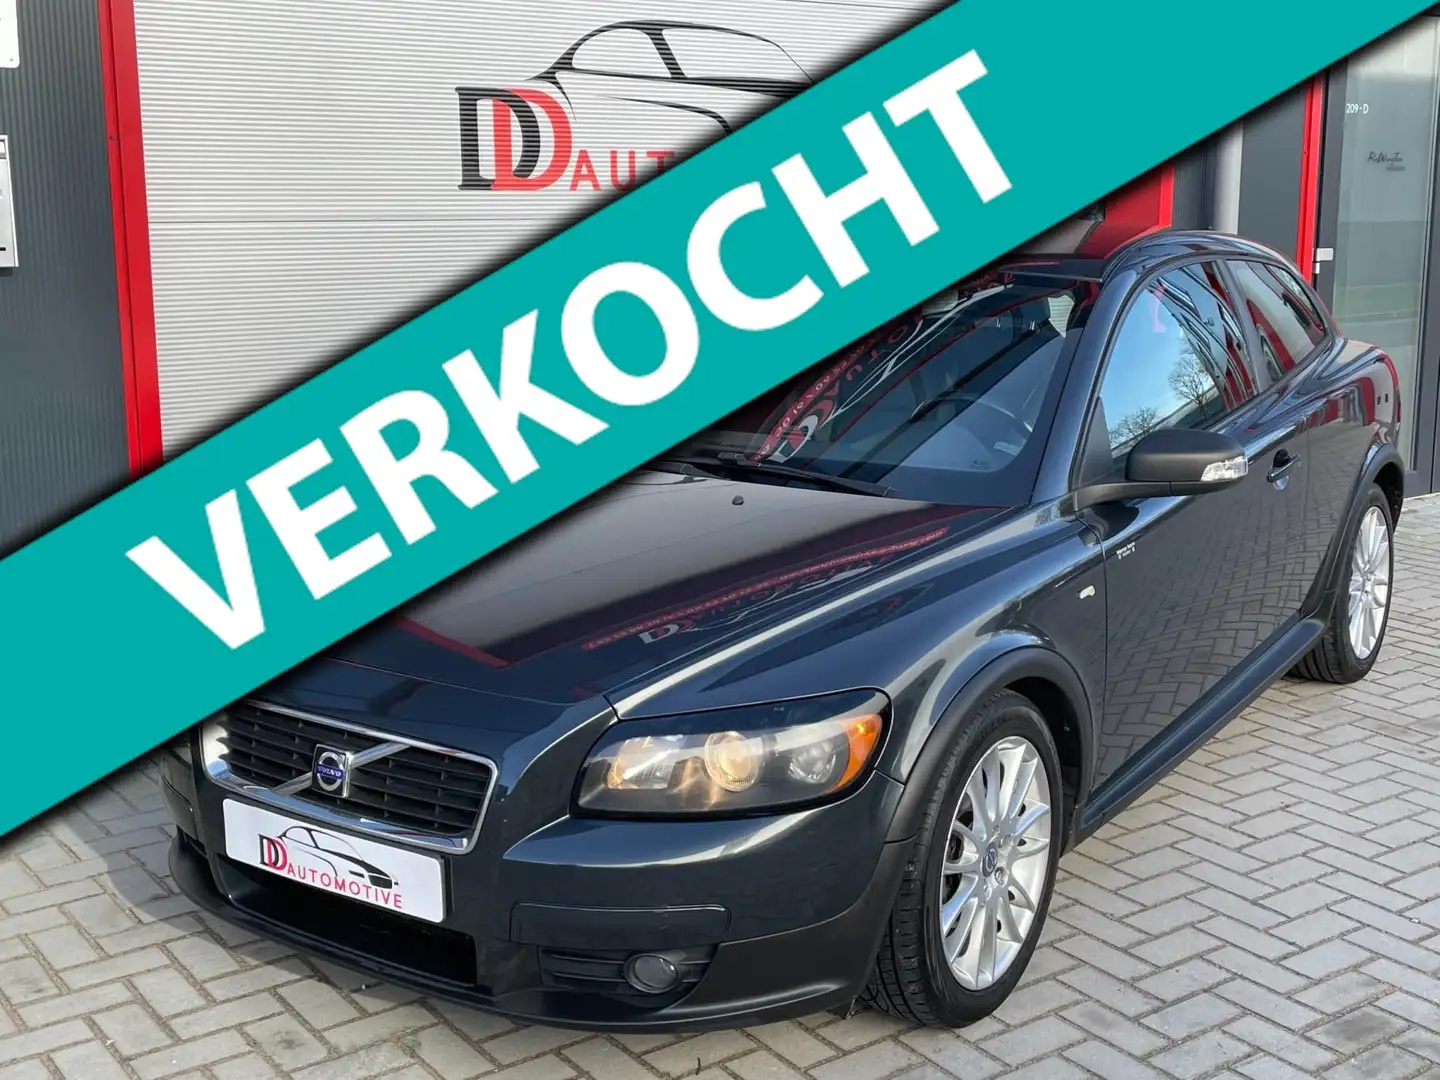 Volvo C30 1.6D DRIVe Sport LEER/PDC/CRUISE/DEALEROH/NAP/ORGN siva - 1